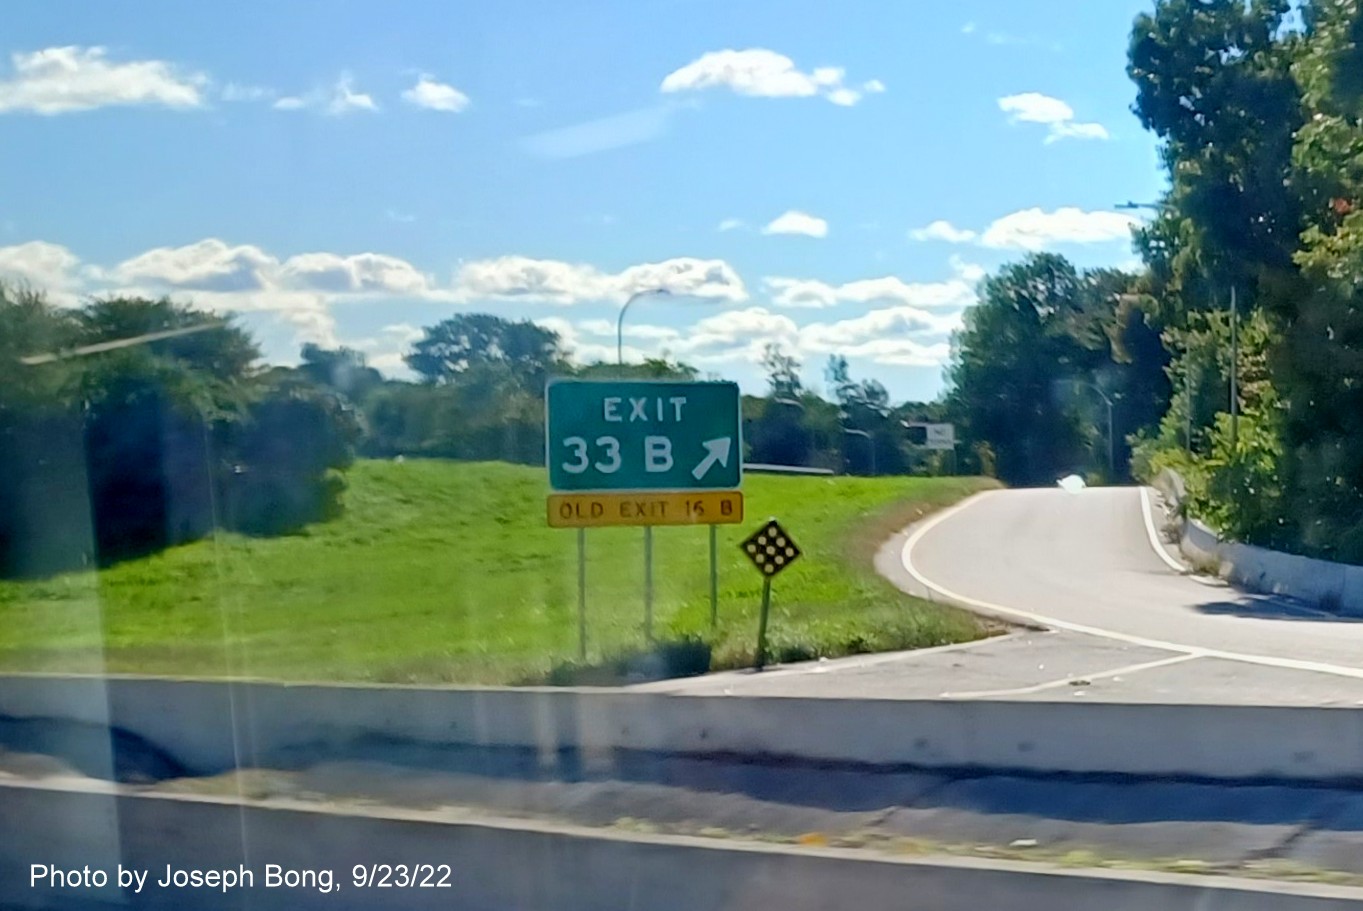 Image of gore sign for RI 10 North exit with new milepost based exit number and yellow Old Exit 16B sign below on I-95 South in Cranston, by Joseph Bong, September 2022